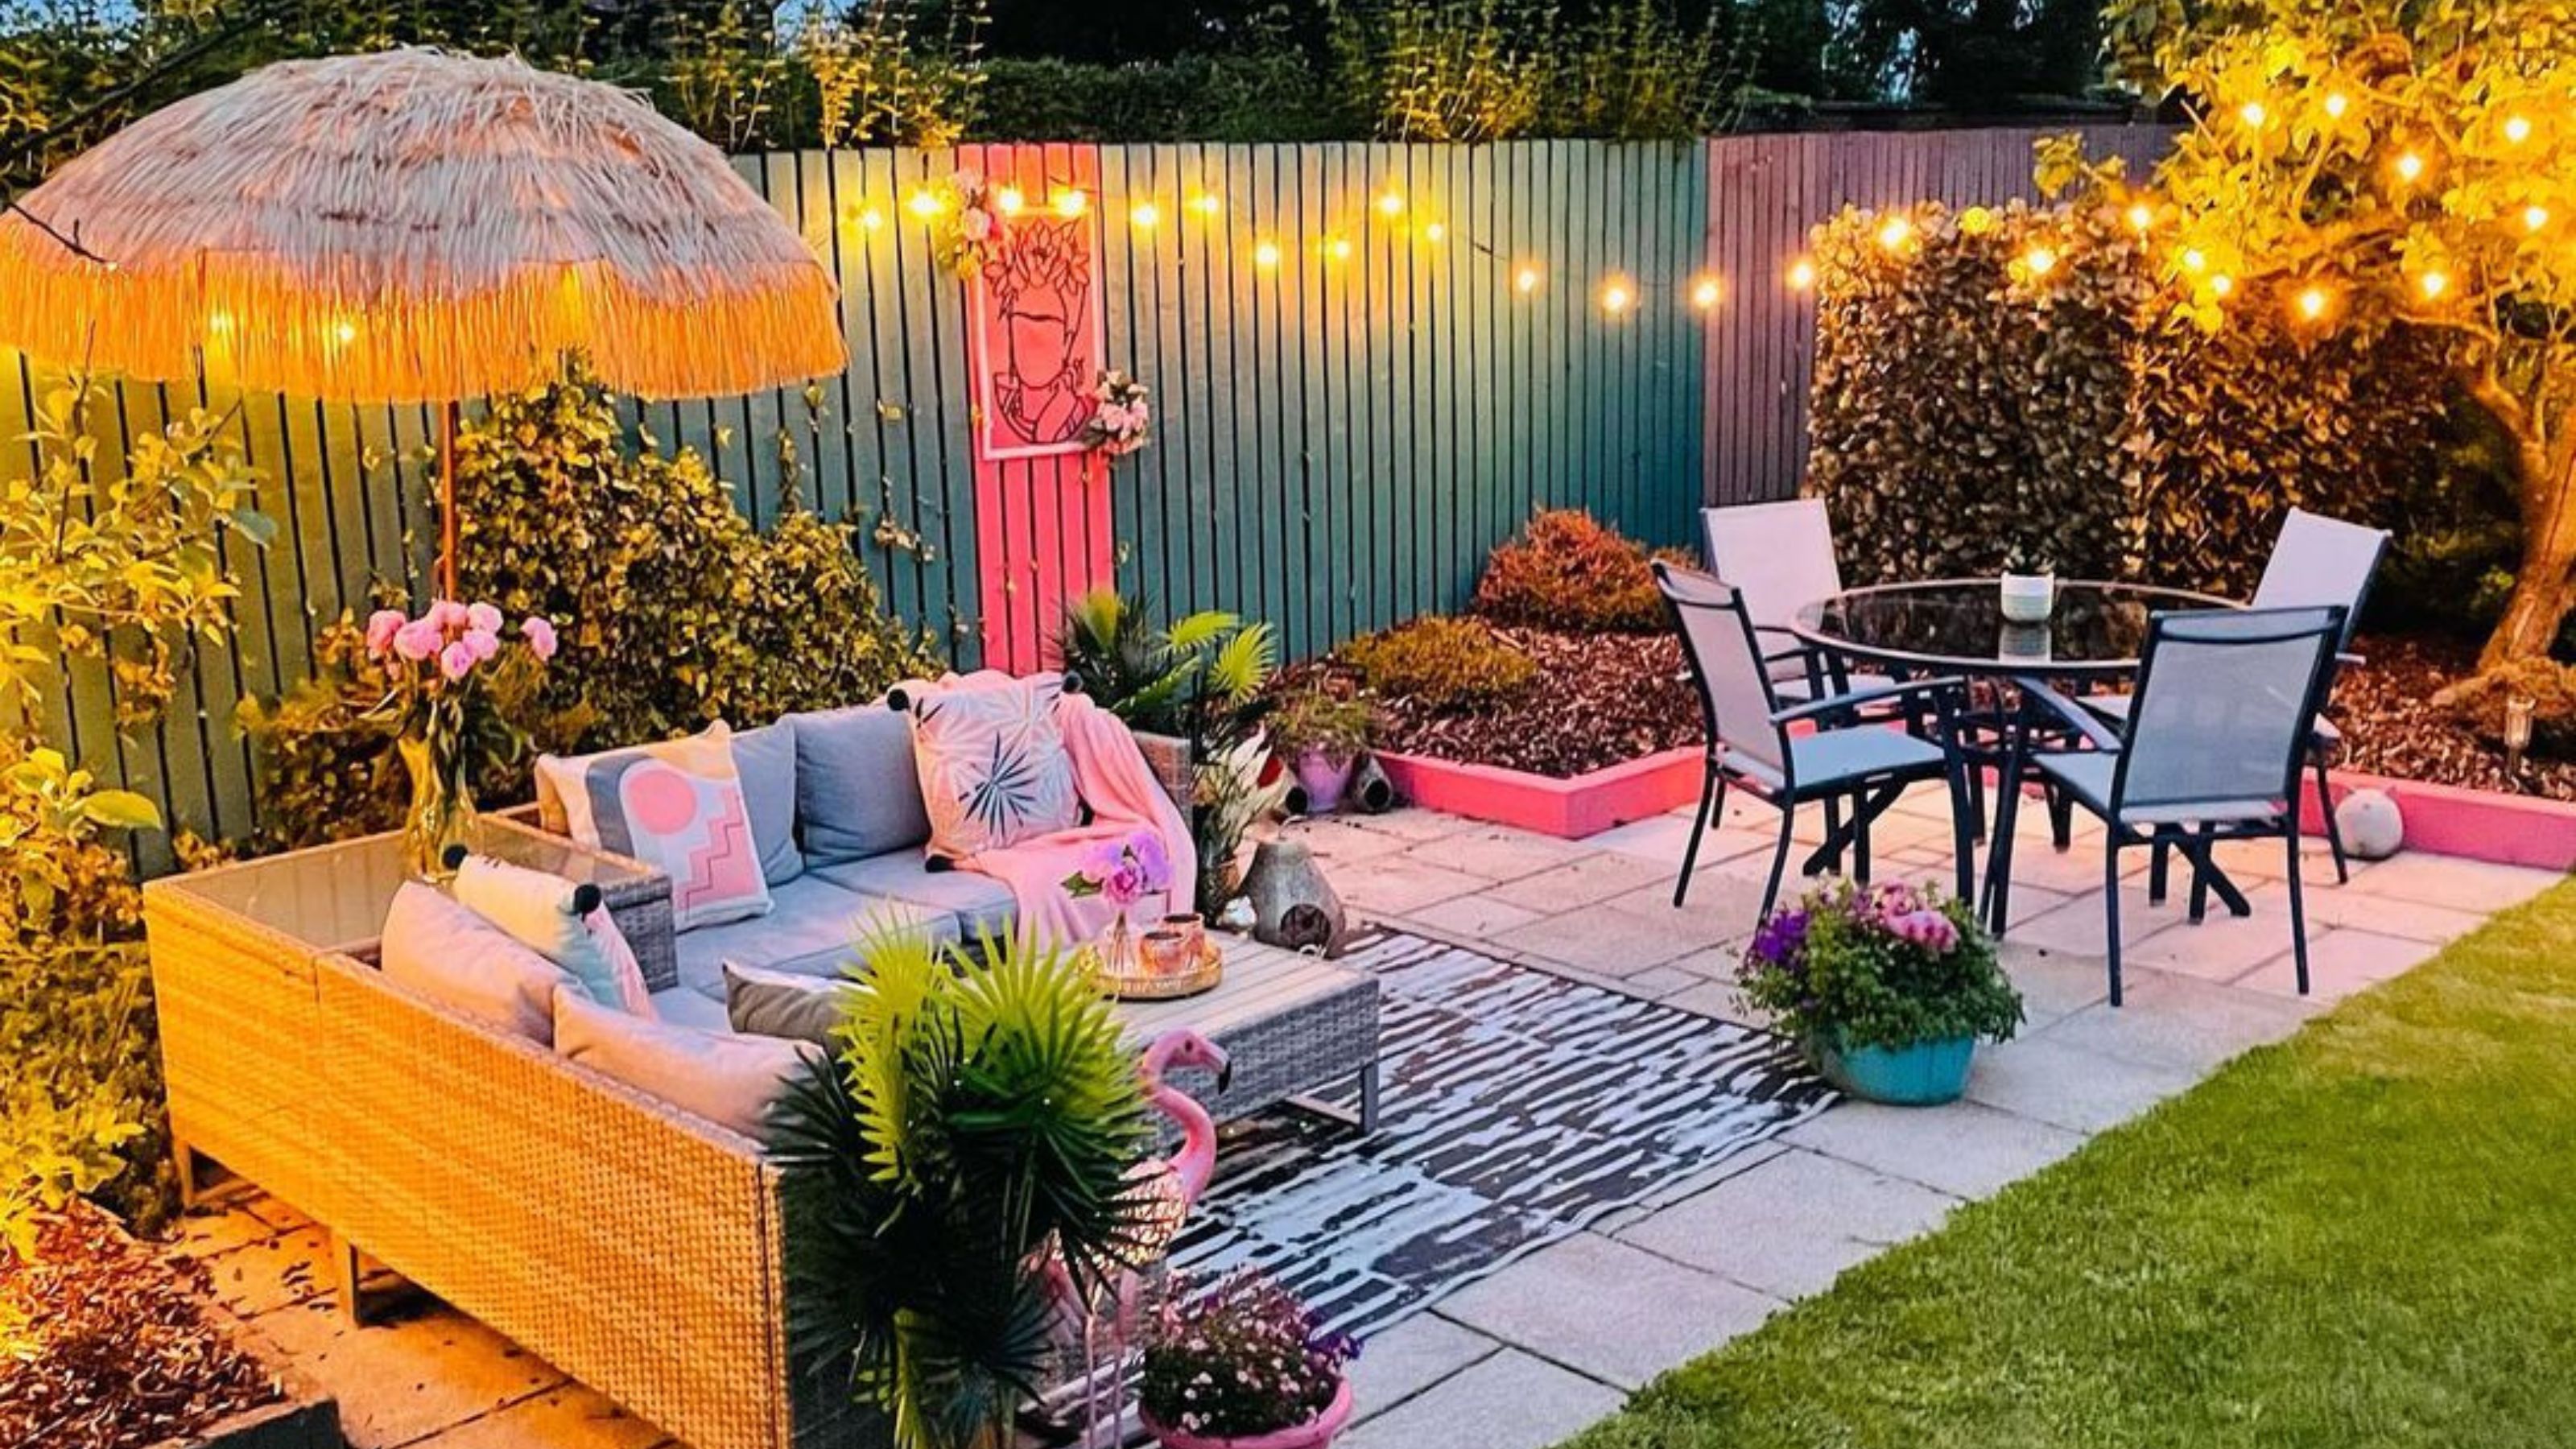 14 Ideas for Creating an Outdoor Oasis